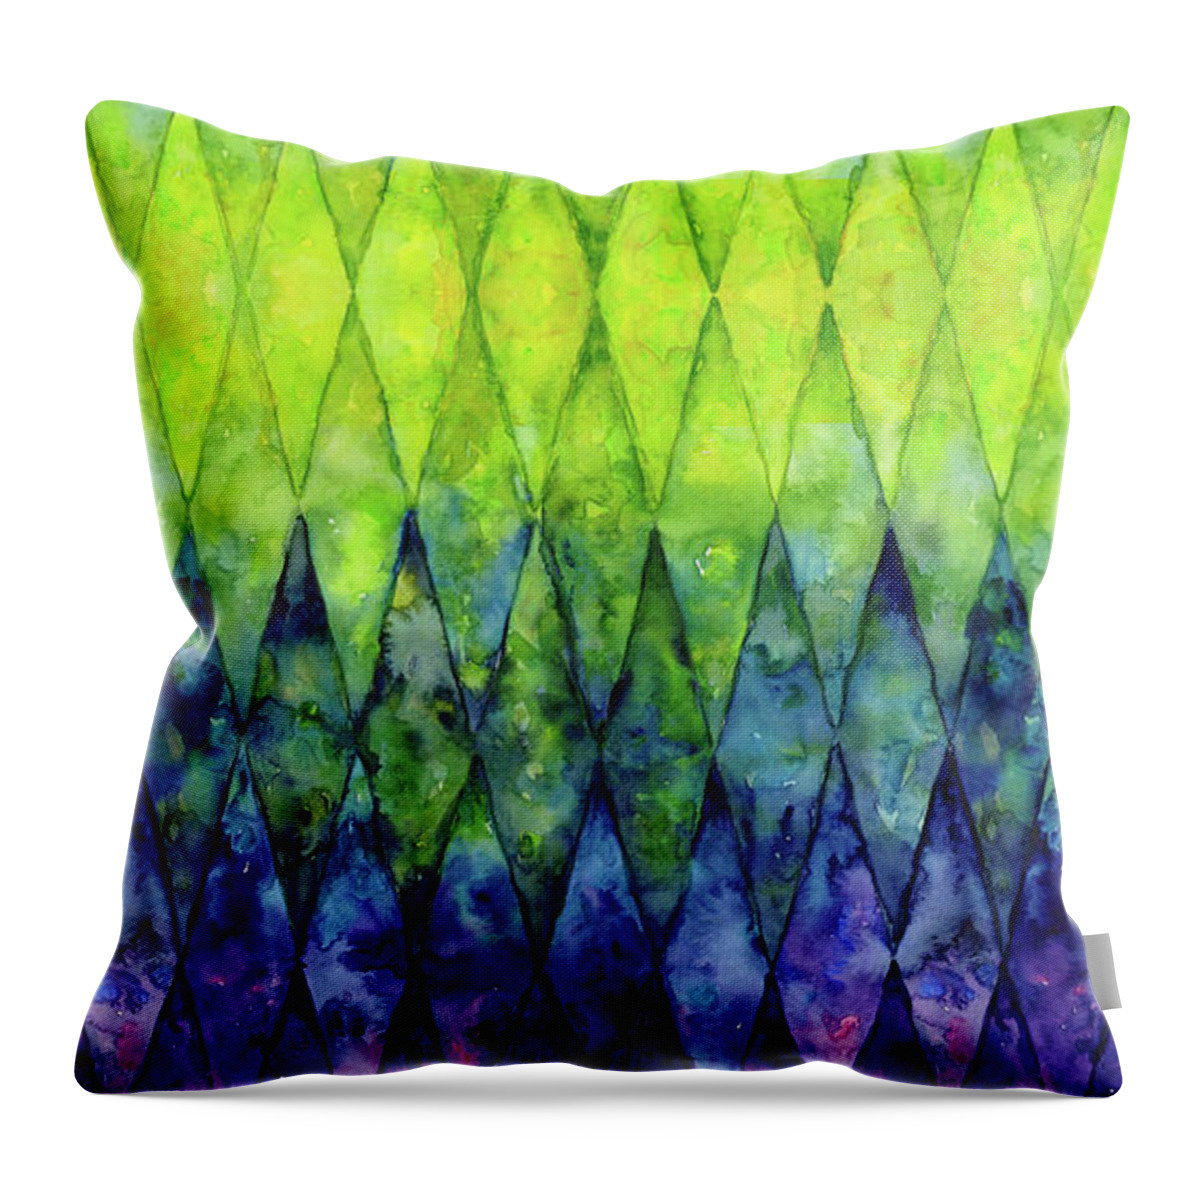 Pattern Throw Pillow featuring the painting Colorful Geometric Pattern Watercolor by Olga Shvartsur